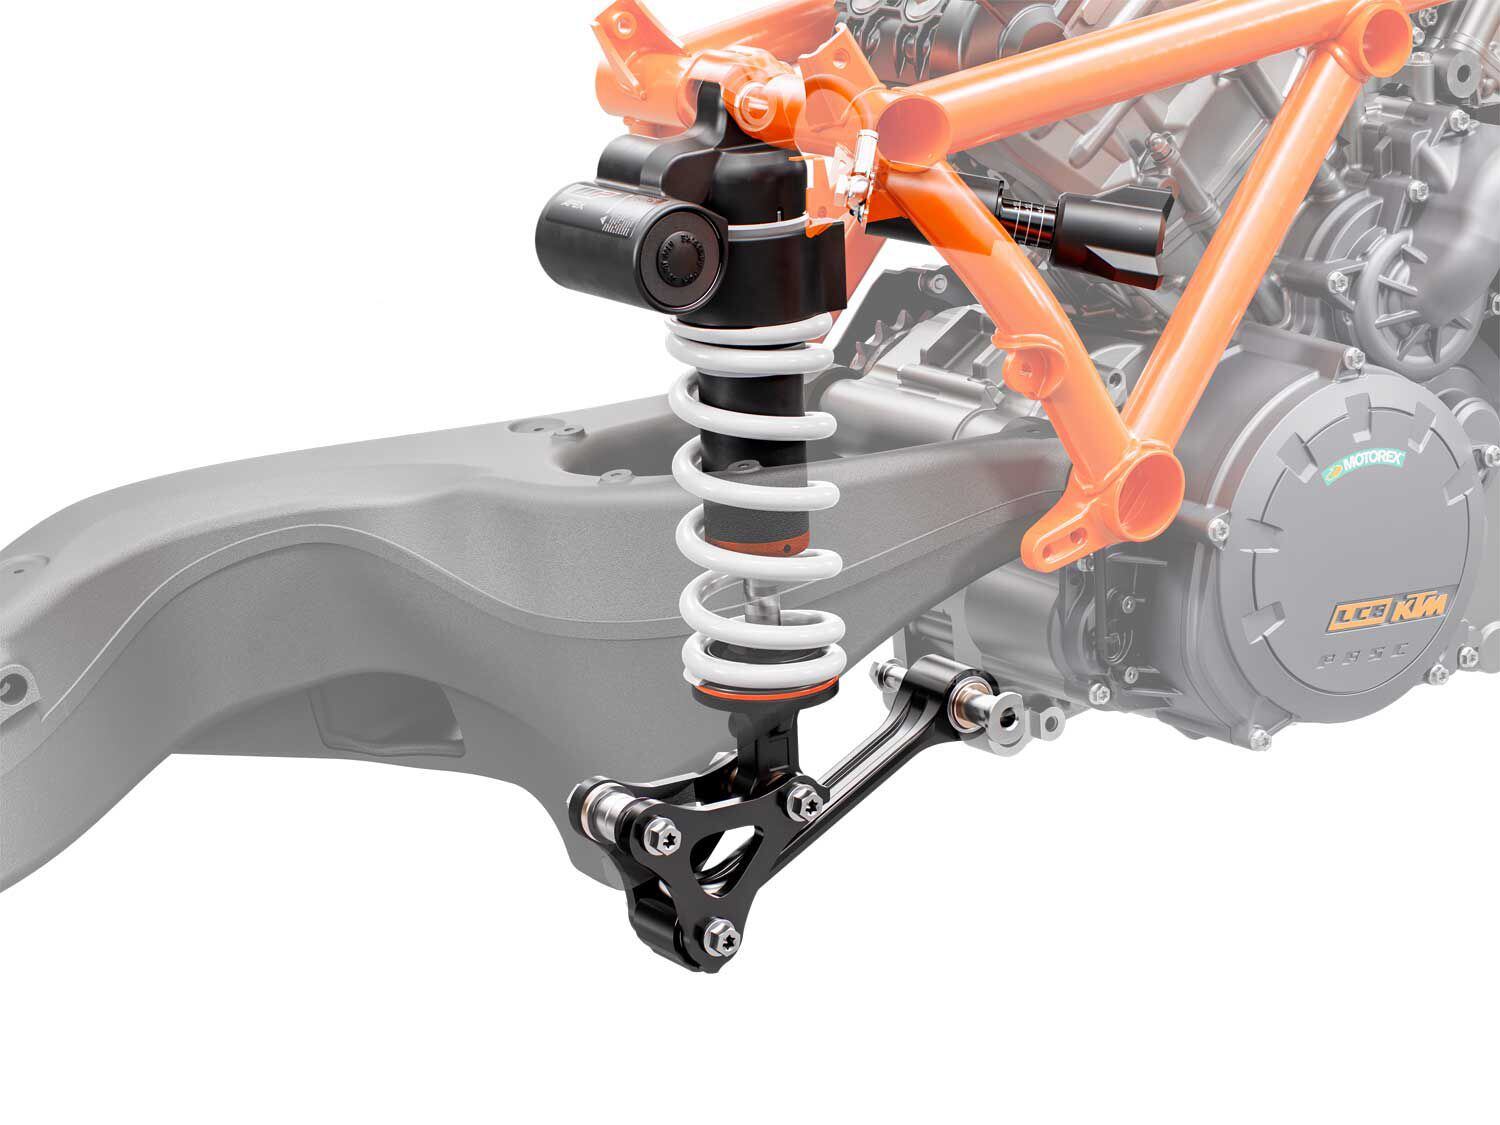 The redesigned rear suspension delivers a significant handling improvement for the 1290 Super Duke R. The chassis is less hyper and more planted at an elevated track pace.